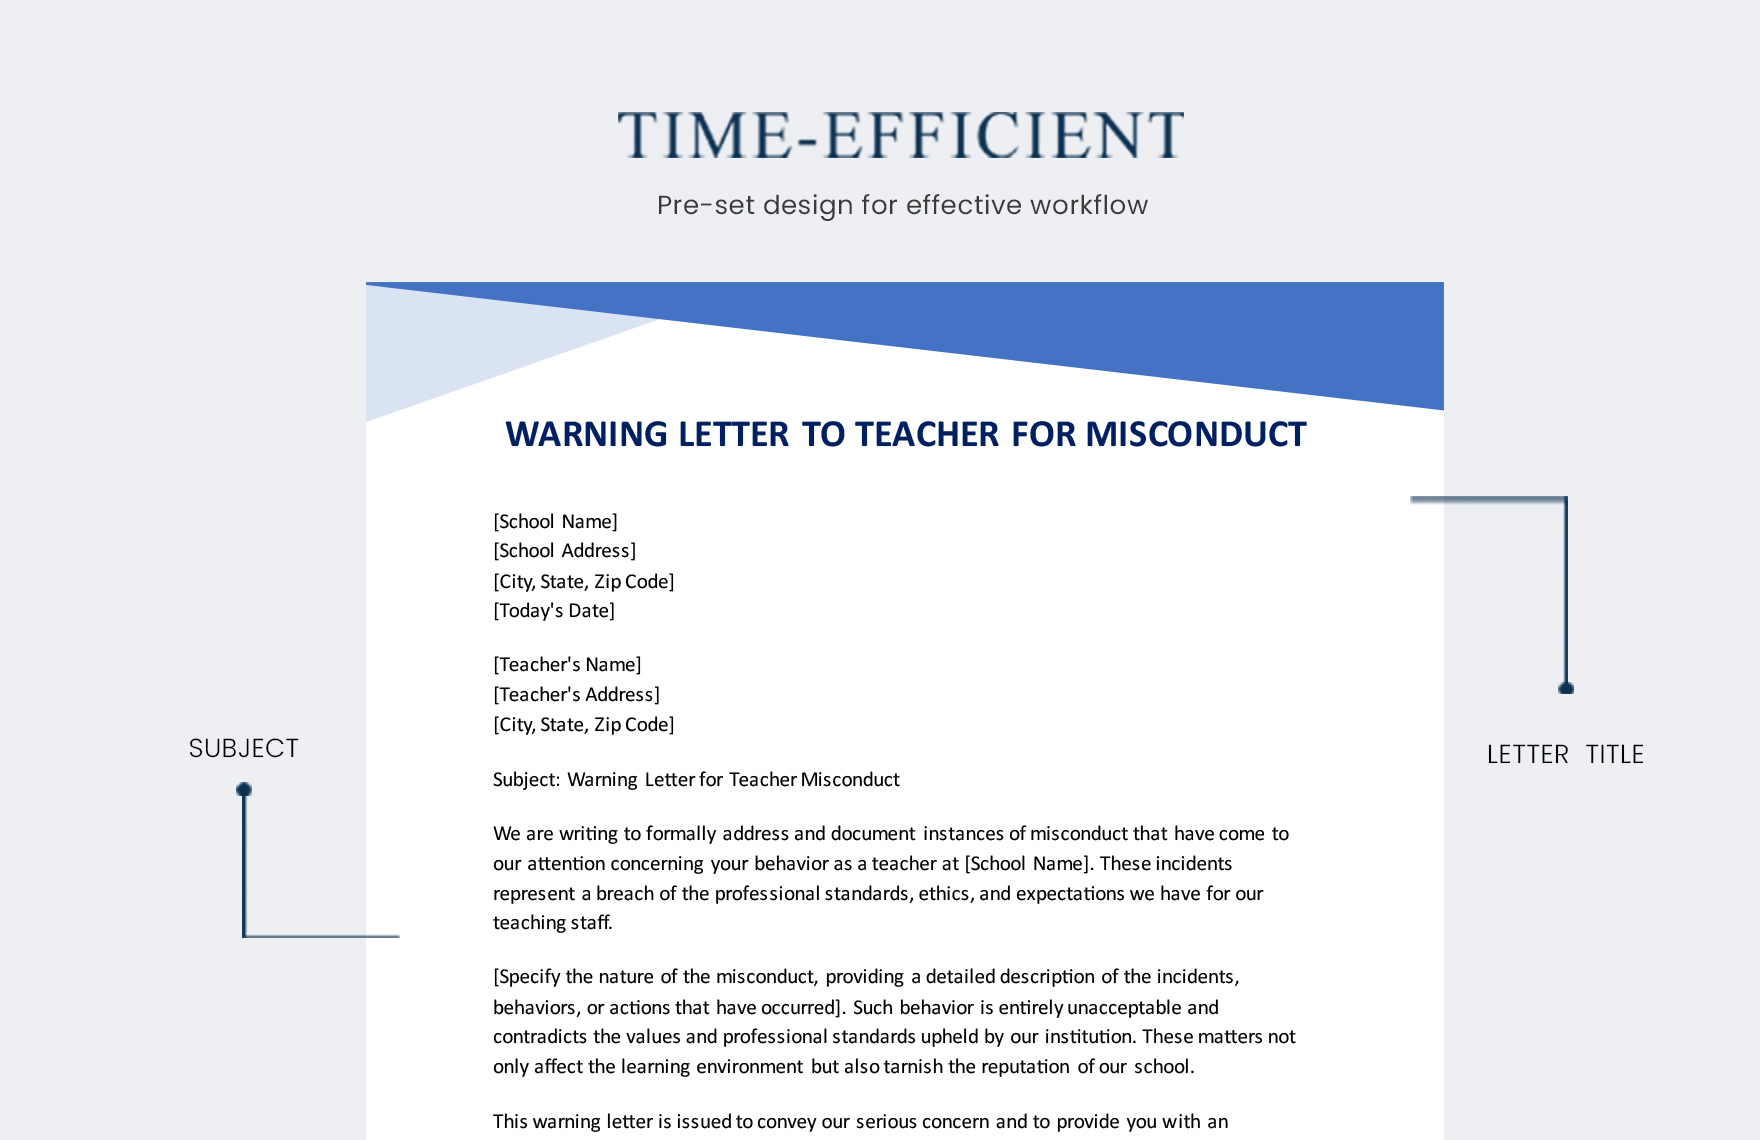 Warning Letter To Teacher For Misconduct